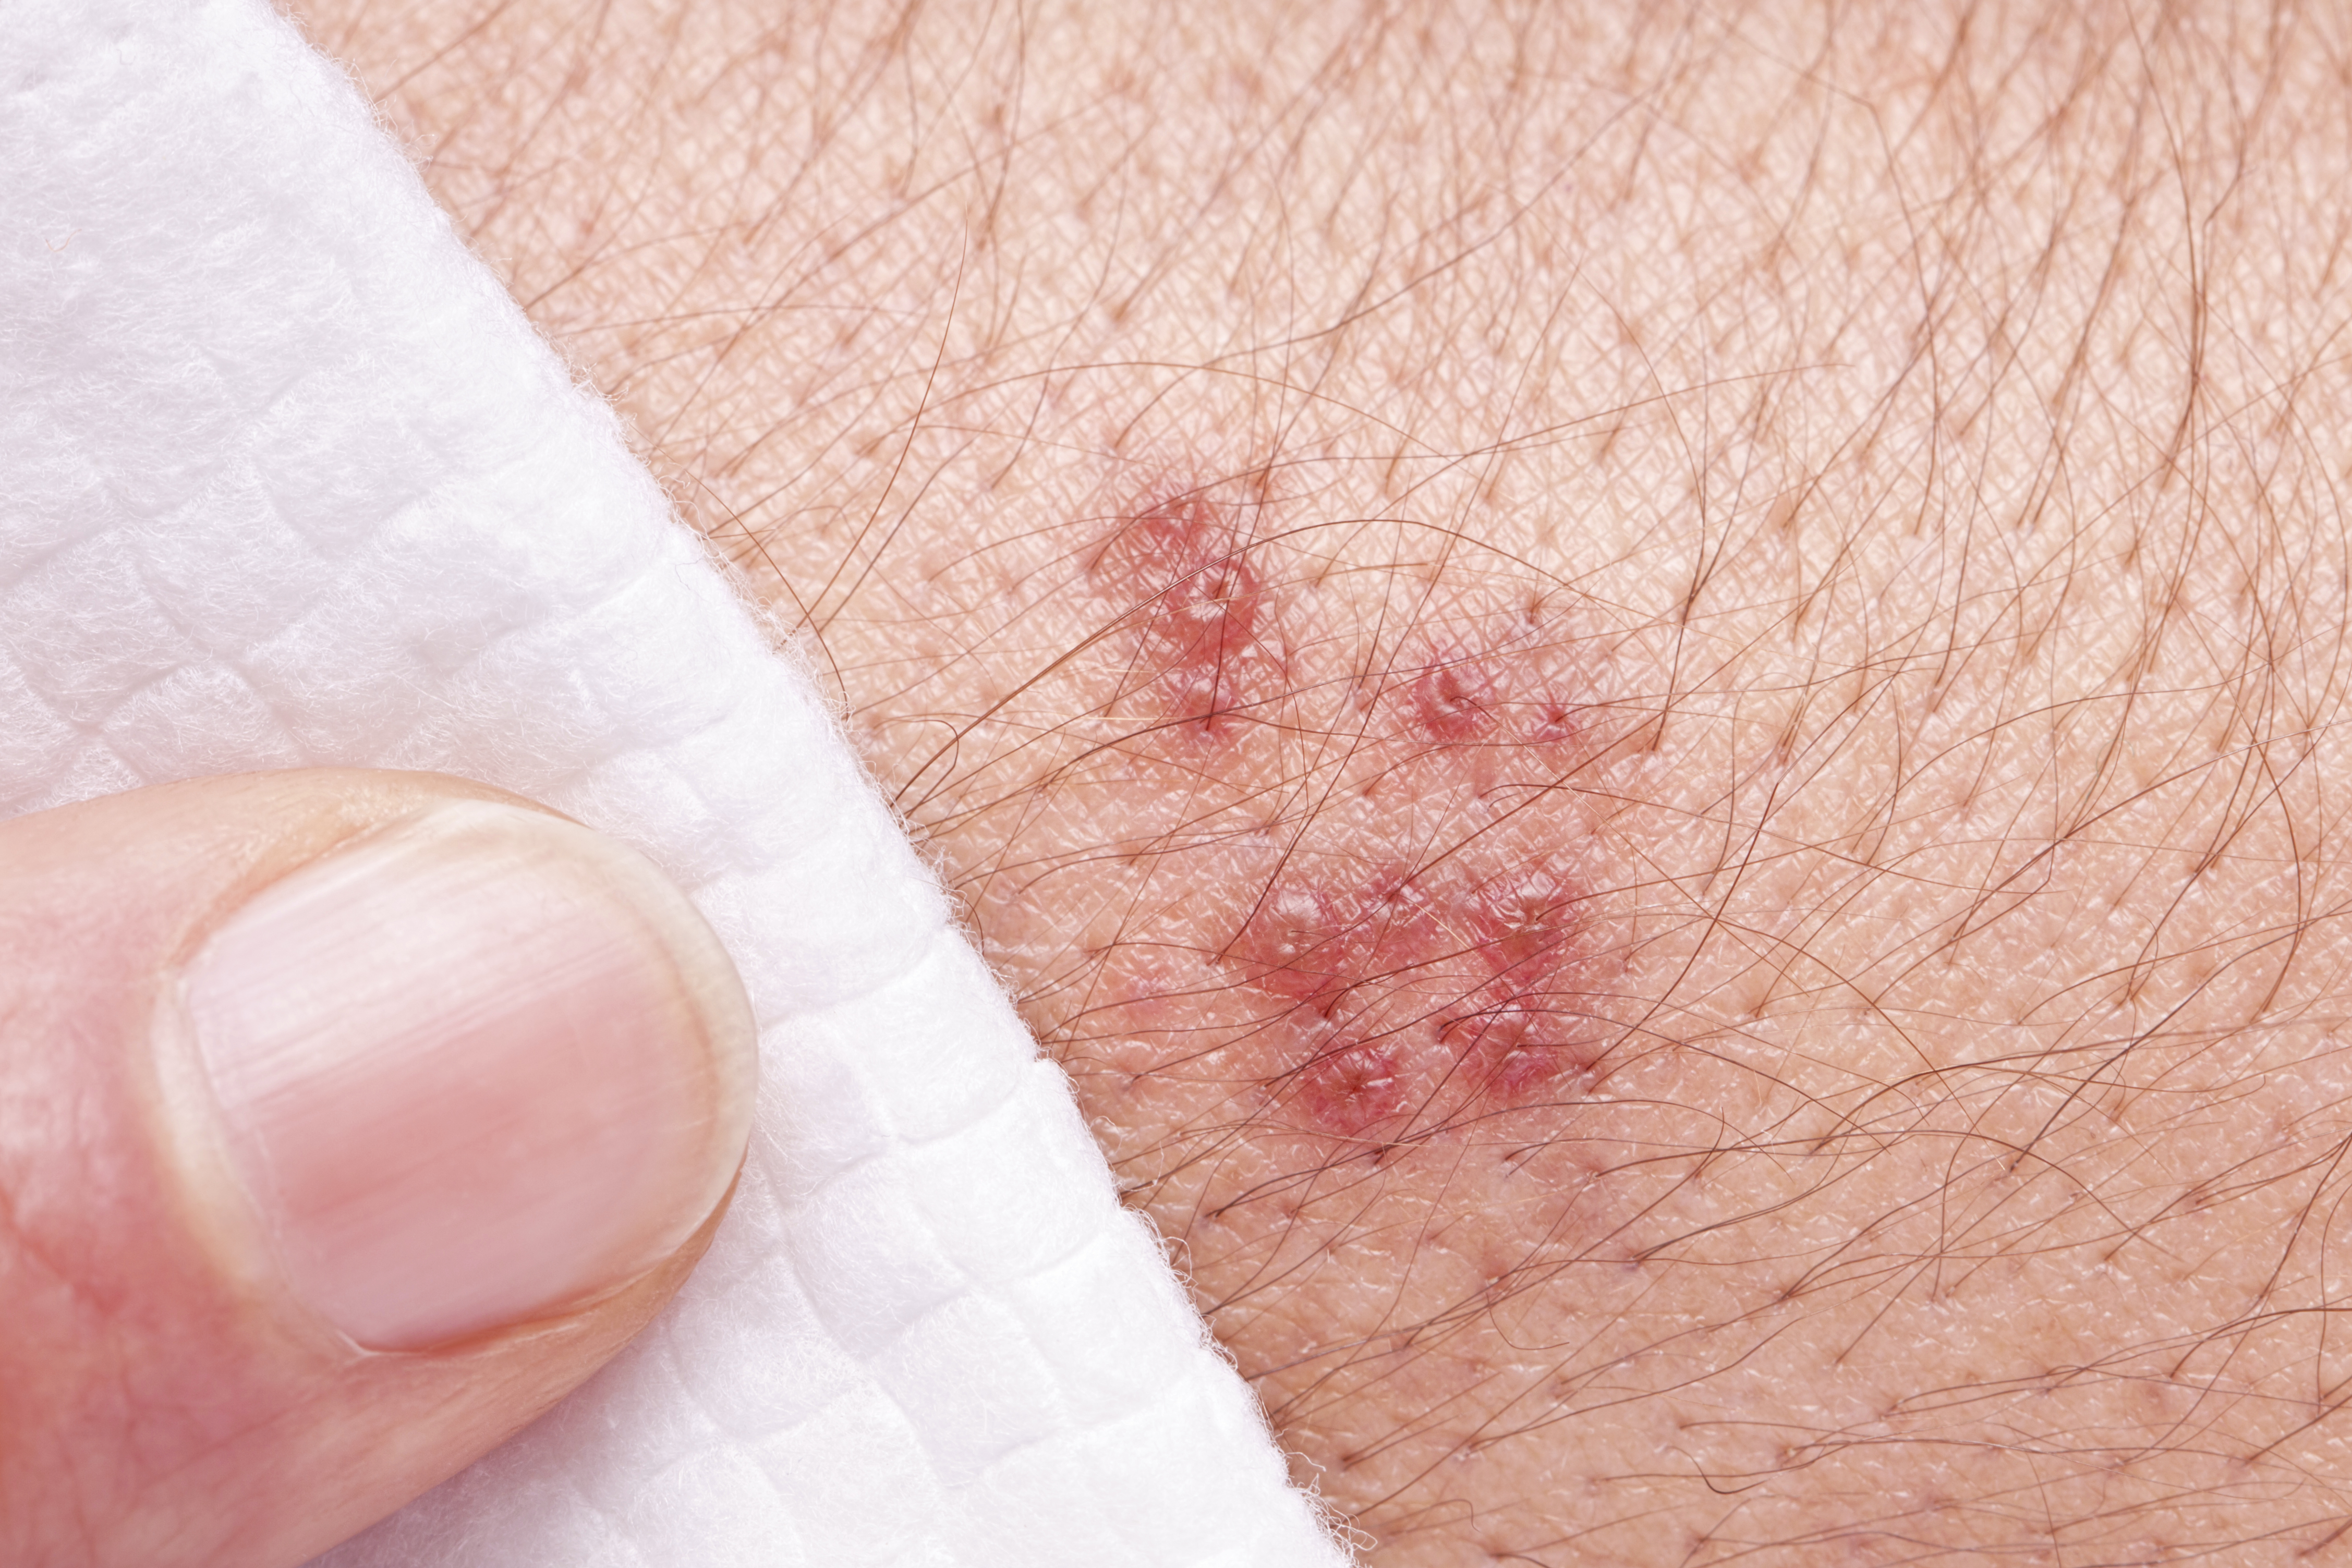 Symptoms Of Herpes Sores Or Rashes - The Body